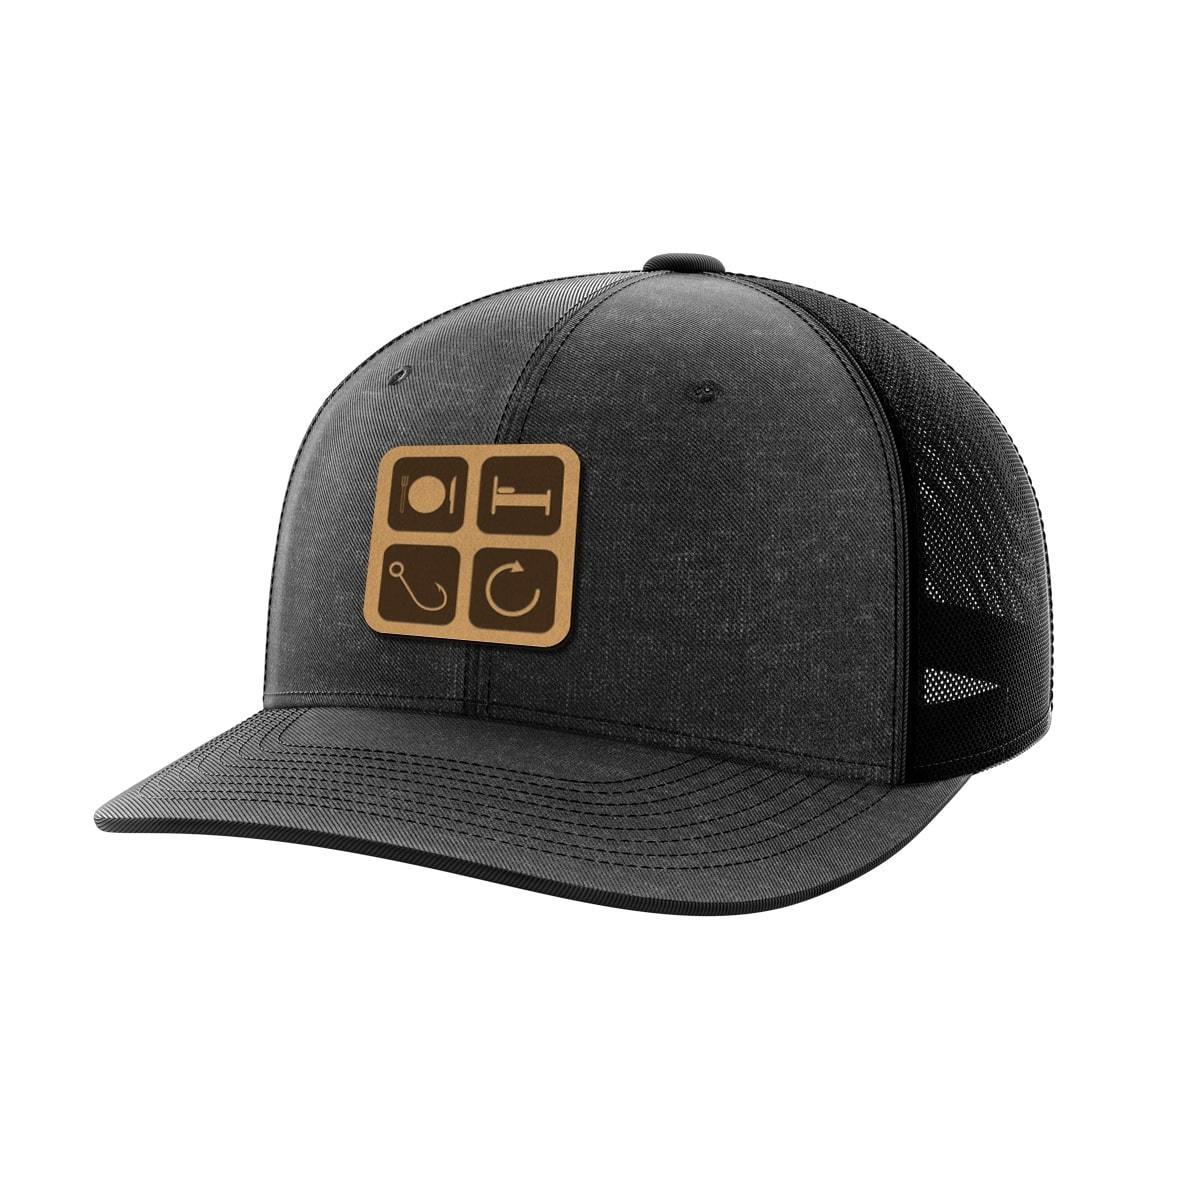 Eat Sleep Fish Repeat Leather Patch Hat - Greater Half